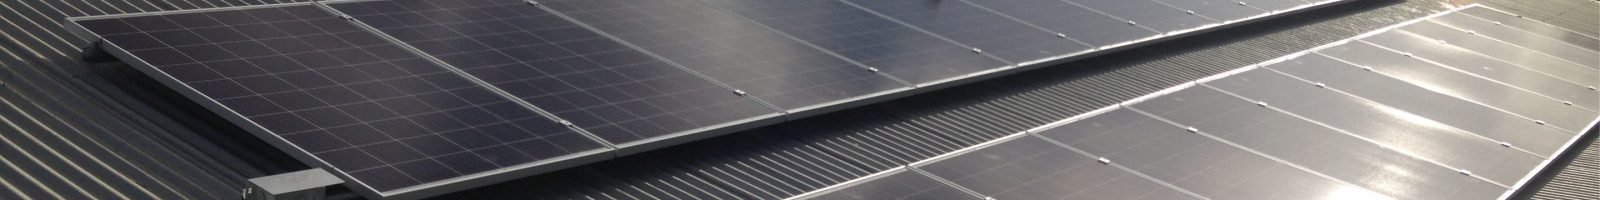 Residential Solar PV Systems